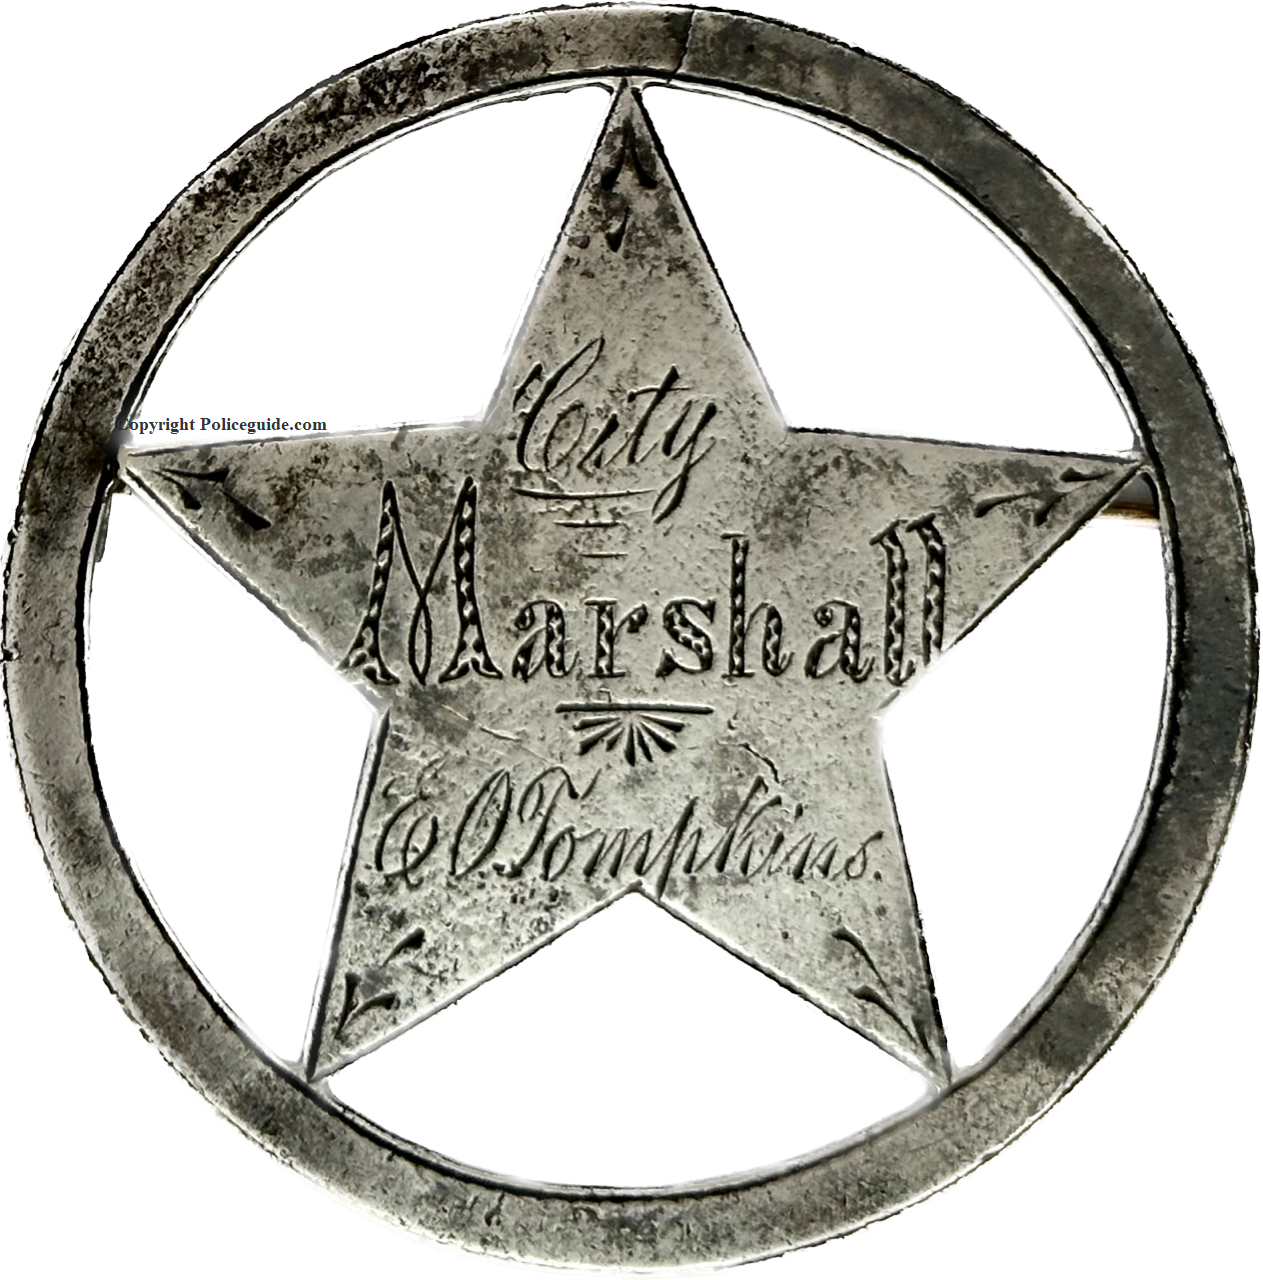 City Marshall  E. O. Tompkins     Nevada Ctiy, CAL   1858 - 1859   Made of sheet silver with hand engraved lettering.   